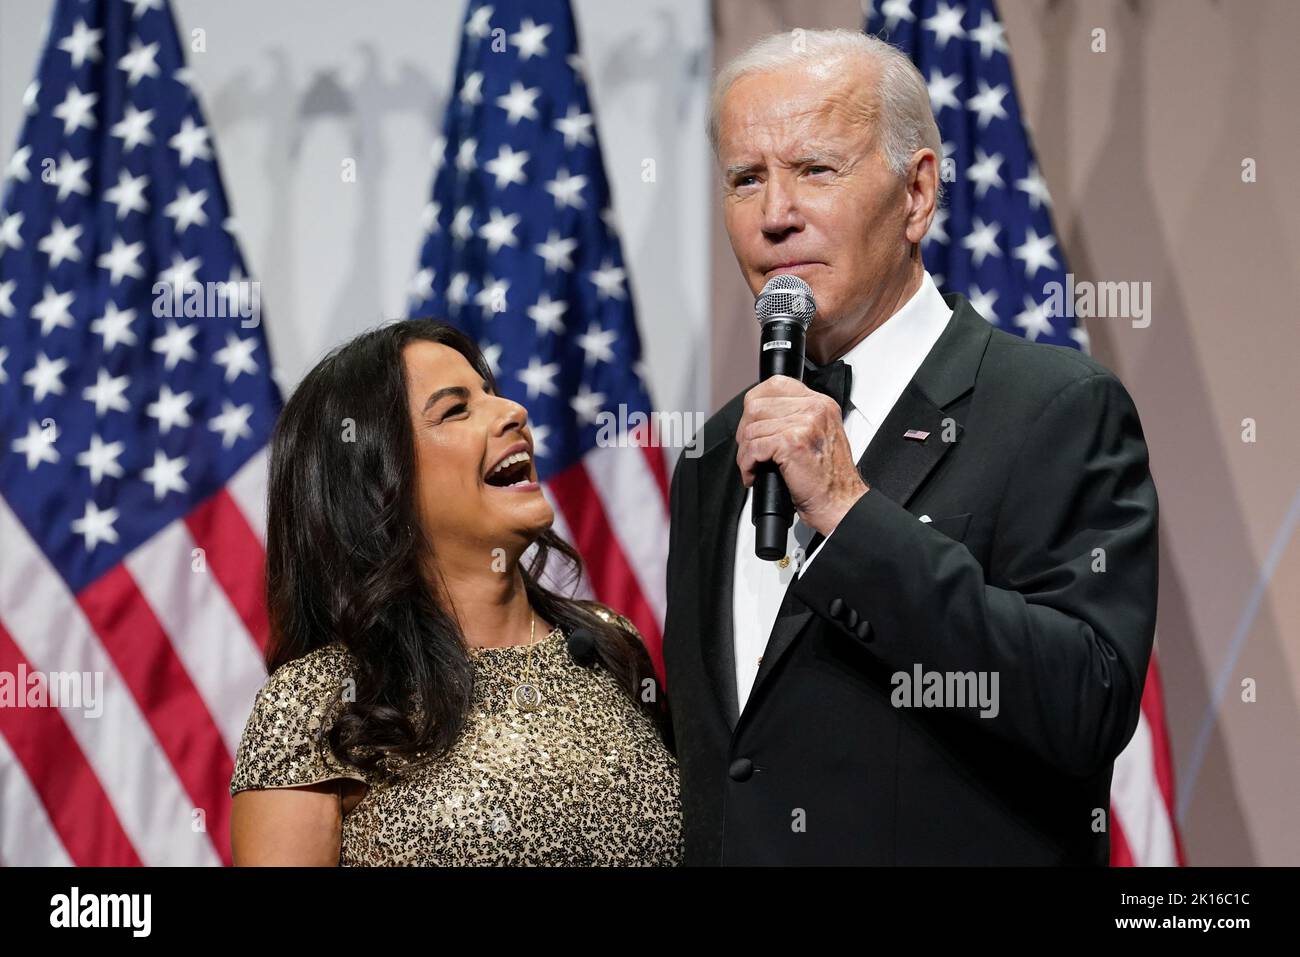 U.S. President Joe Biden speaks next to U.S. Rep. Nanette Barragan (D-CA) as he attends the 45th Congressional Hispanic Caucus Institute Gala to kick-off the White House's celebration of Hispanic Heritage Month, in Washington, U.S. September 15, 2022. REUTERS/Kevin Lamarque Stock Photo